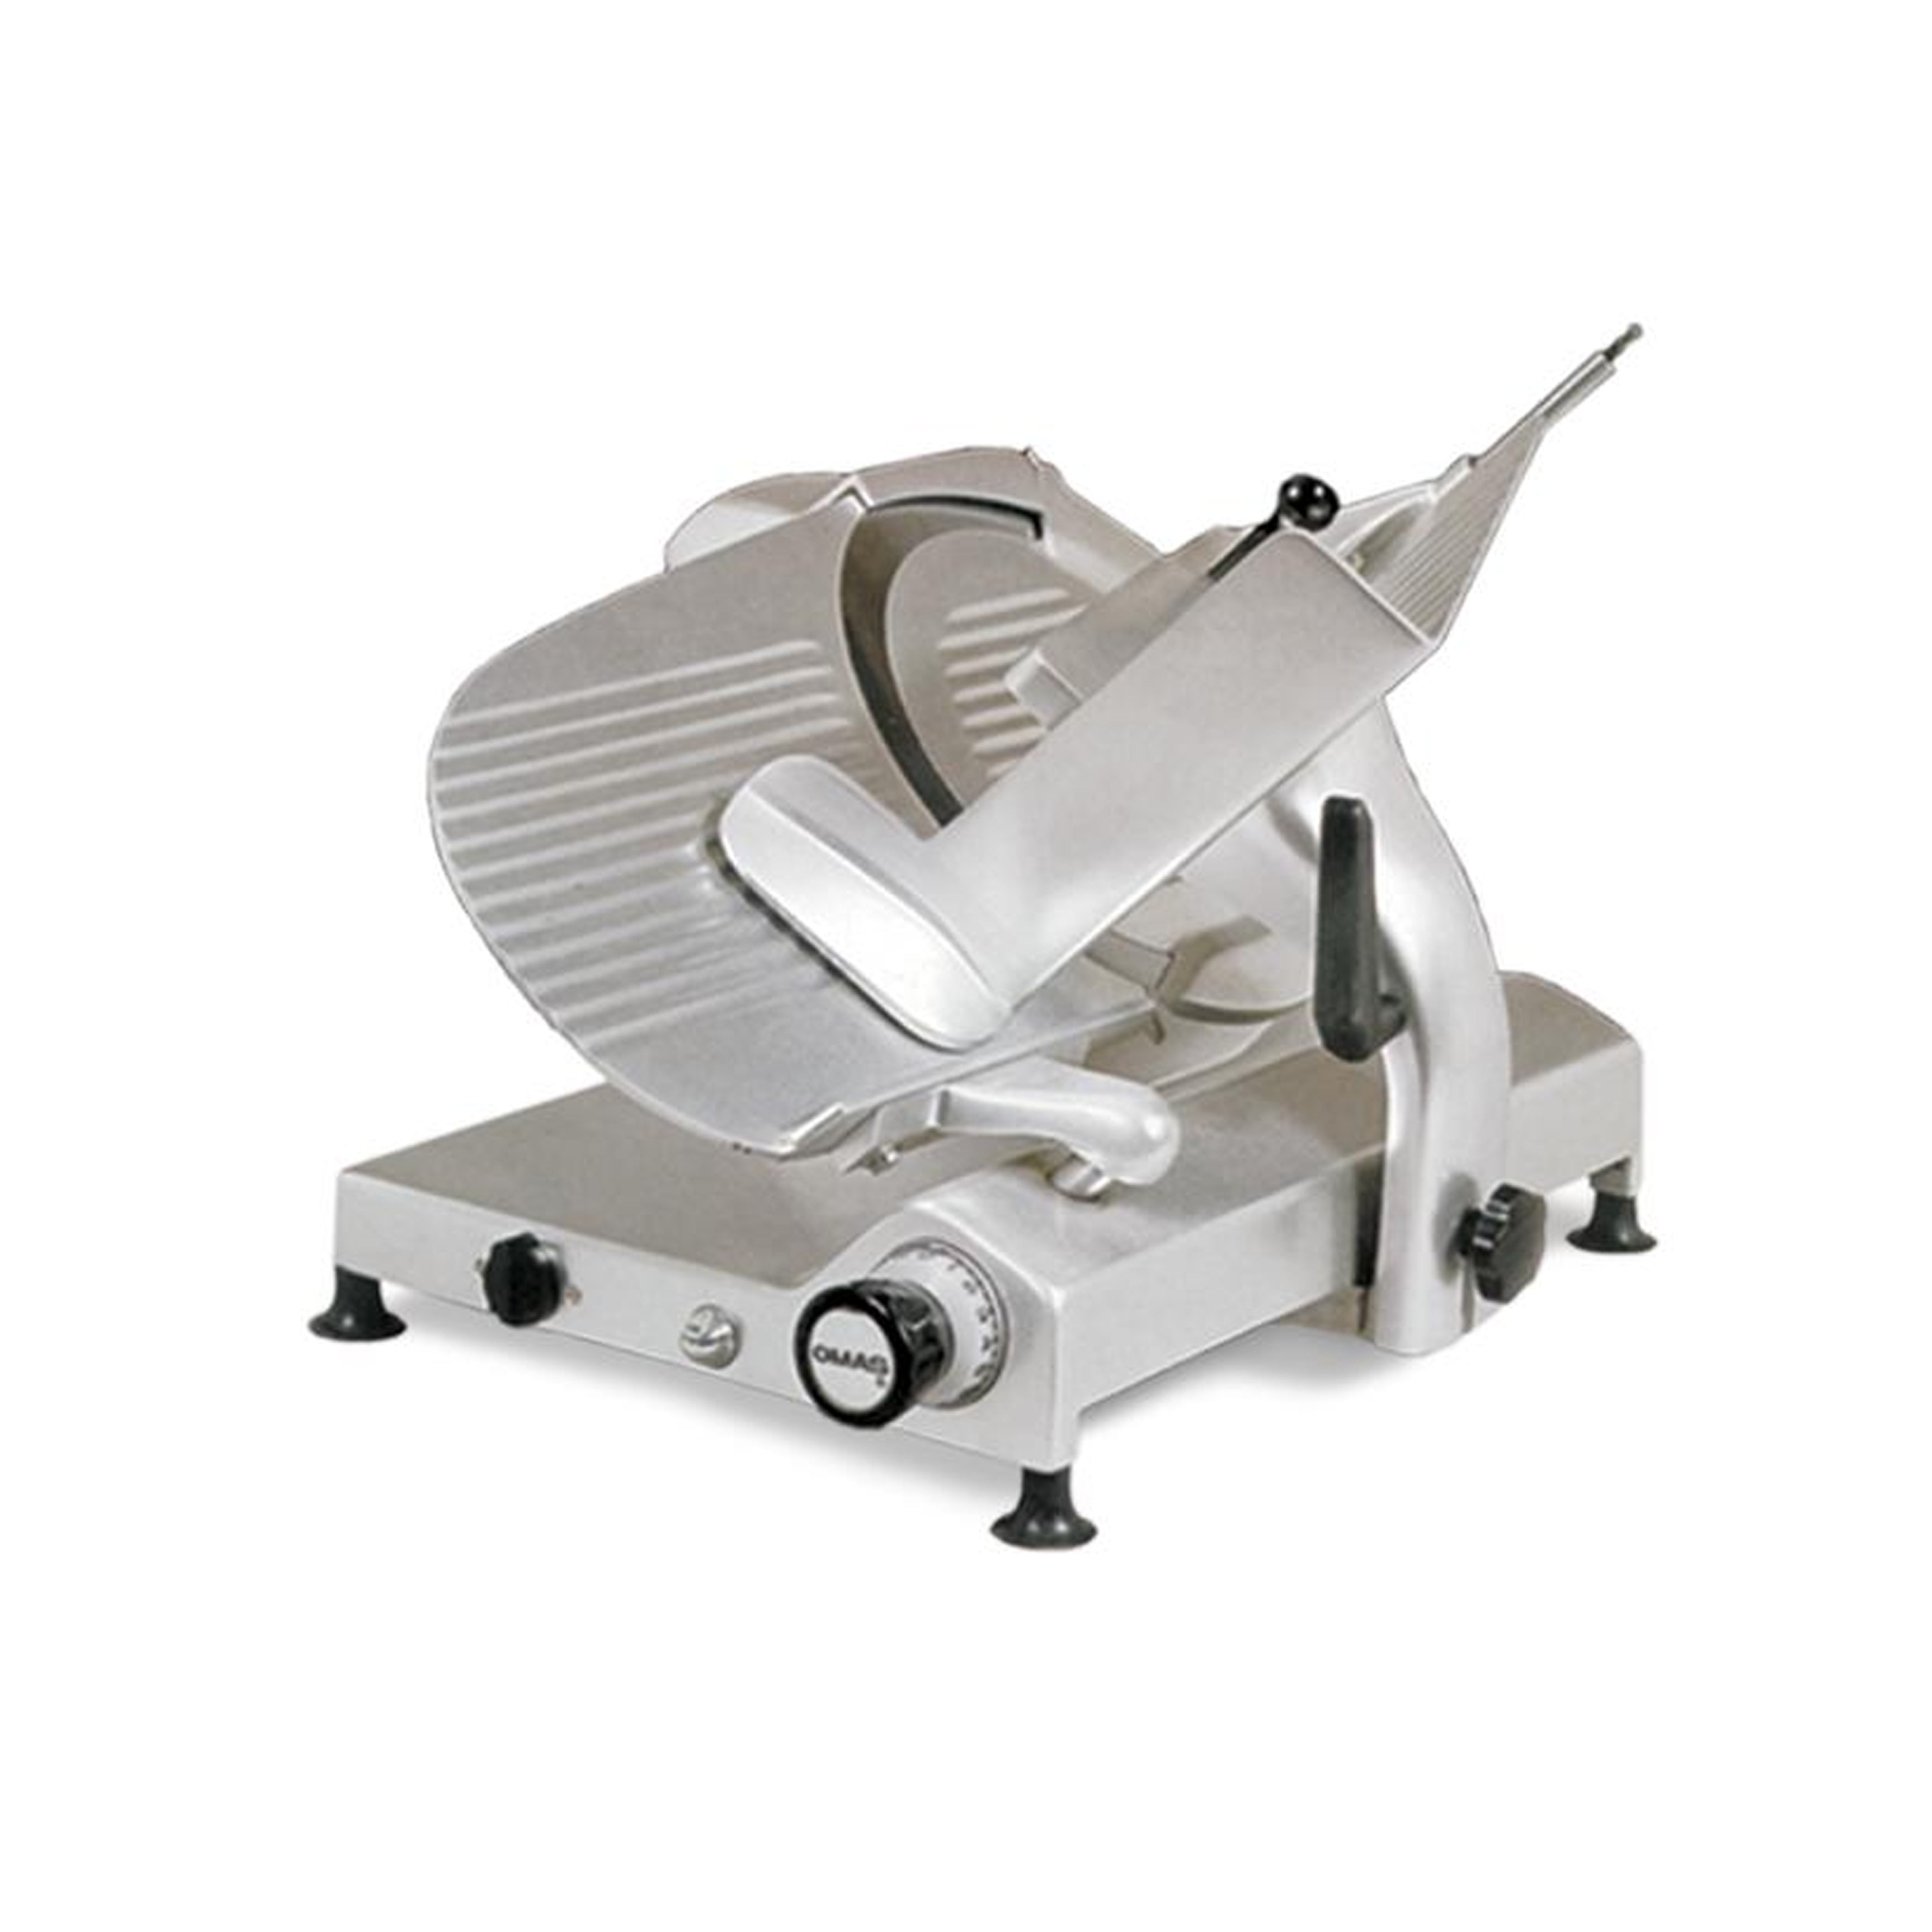 Omcan - MS-IT-0300-G, Commercial 12" Gear Driven Meat Slicer 110v